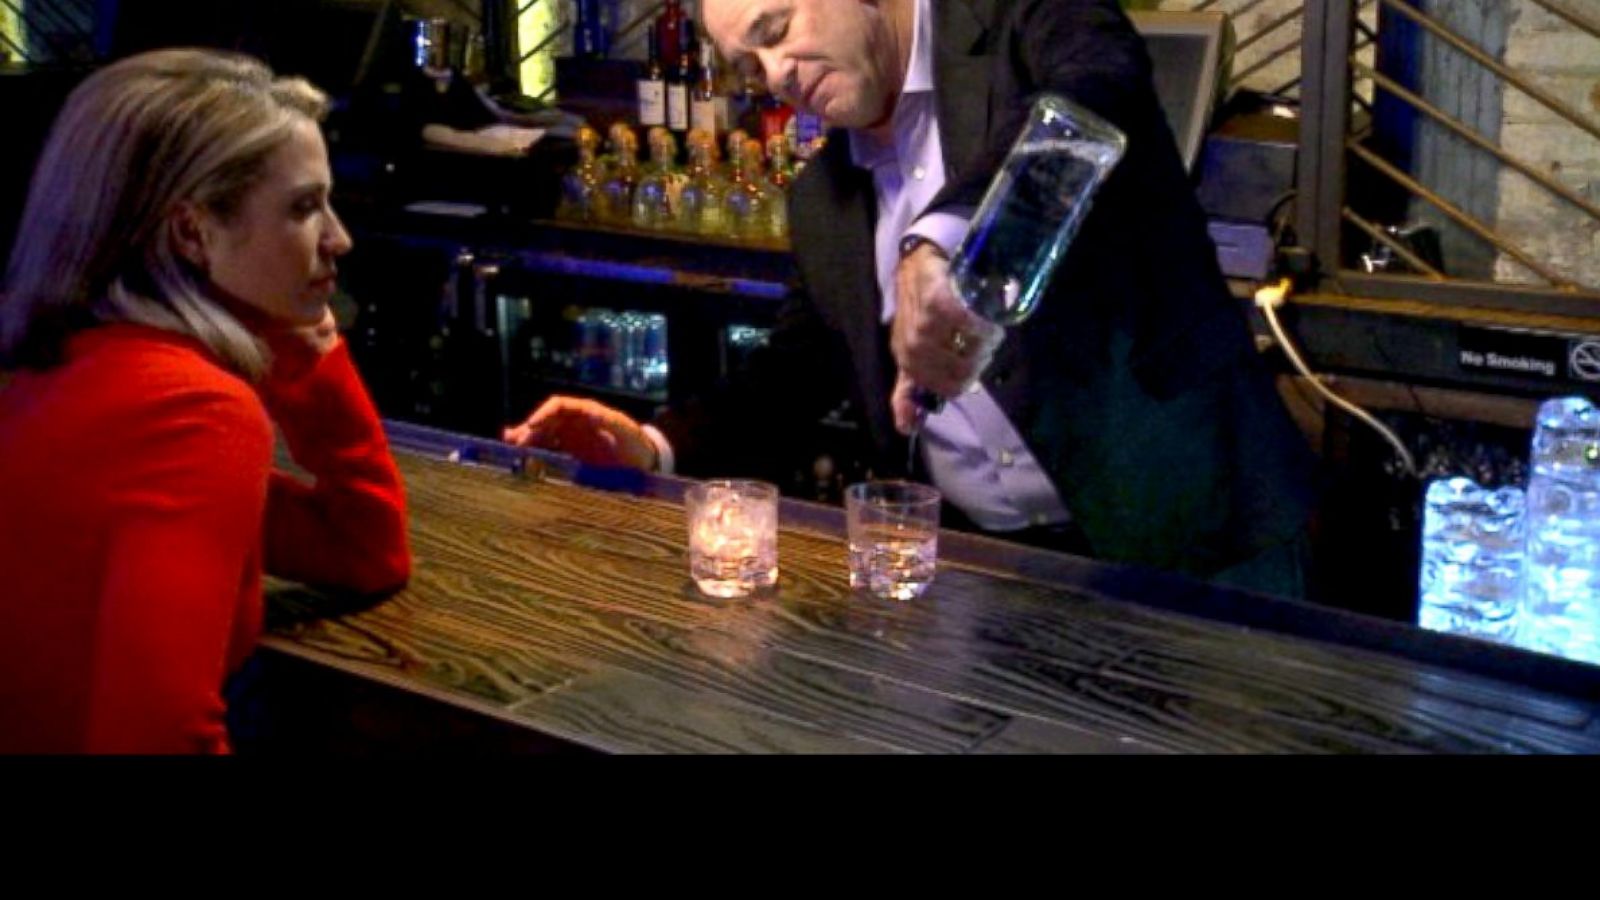 Whats the best way to talk to a female bartender?